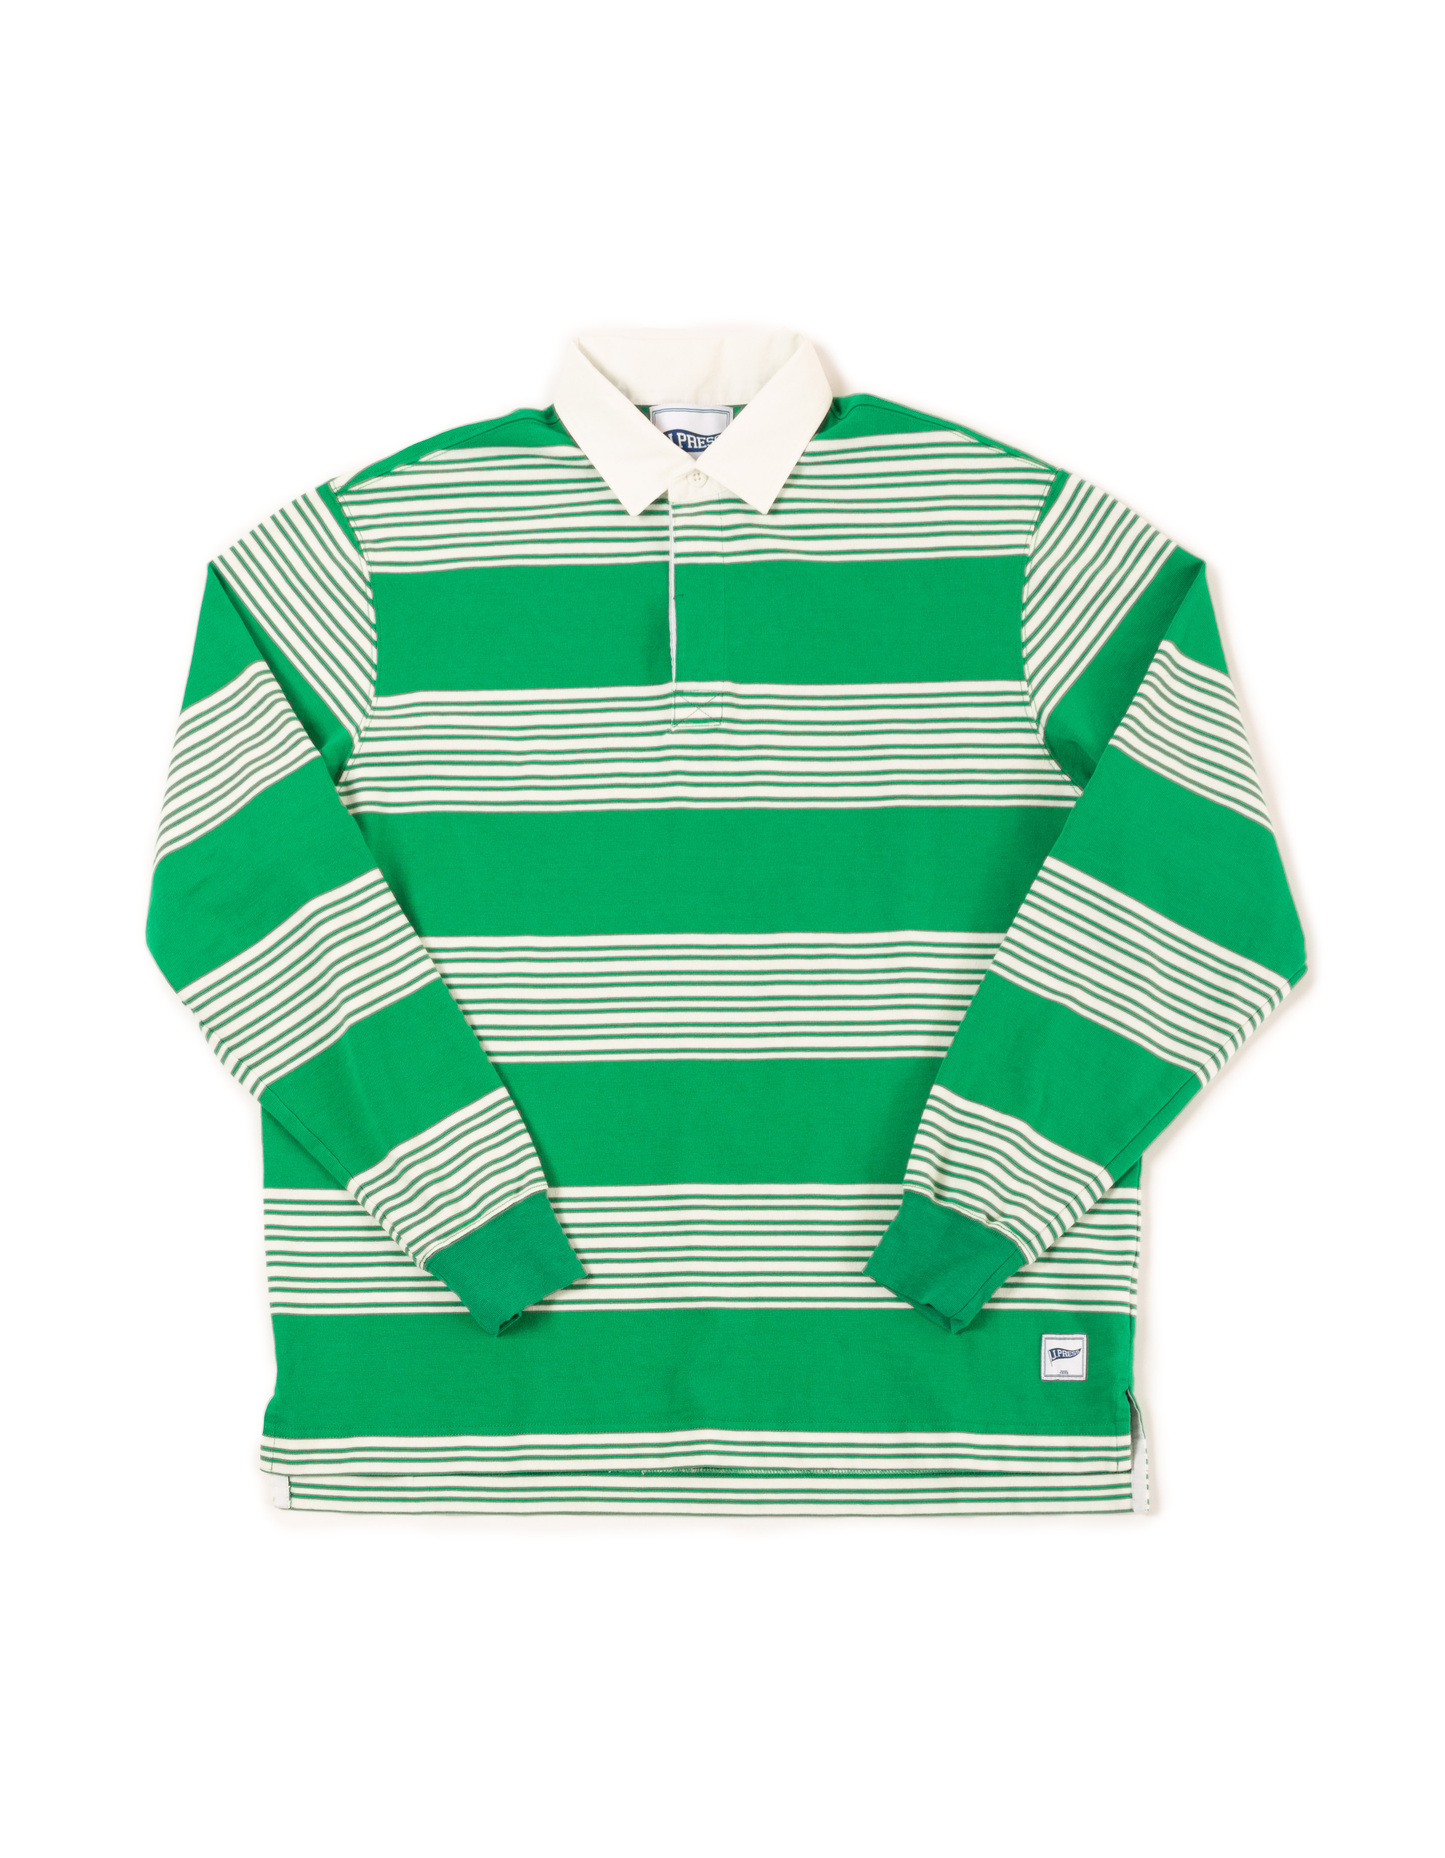 STRIPED RUGBY SHIRT - GREEN/WHITE